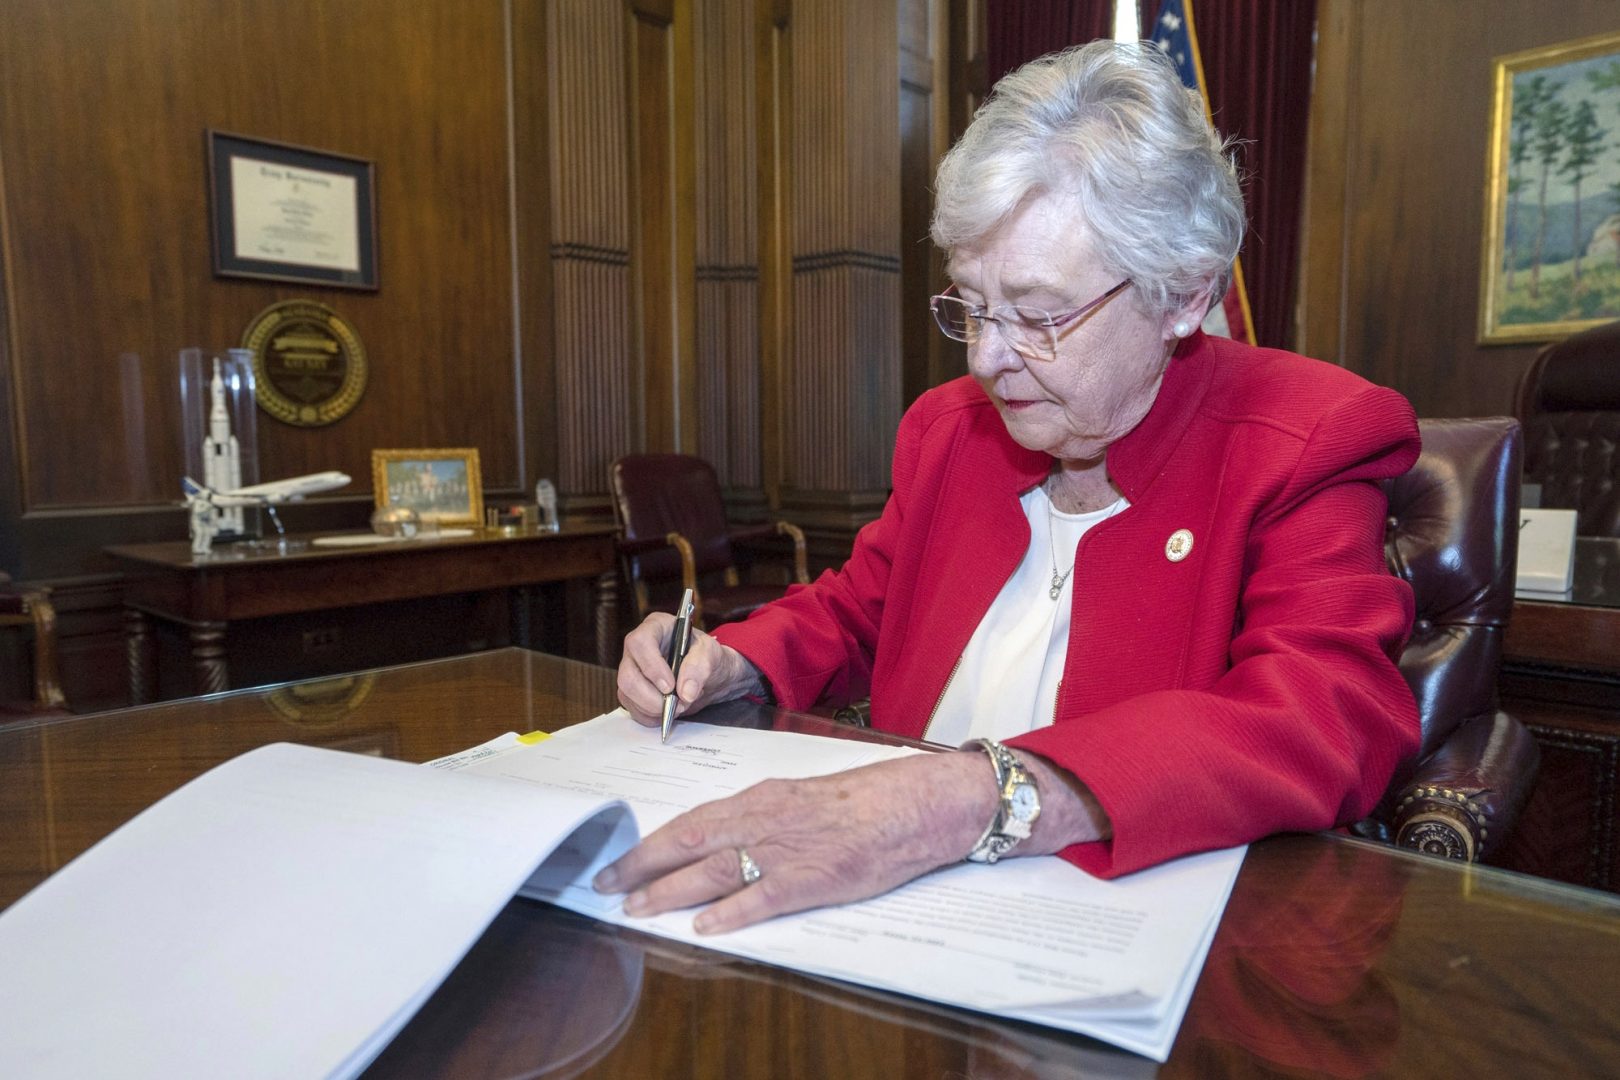 FILE PHOTO: In this Wednesday, May 15, 2019 file photo released by the state shows Alabama Gov. Kay Ivey signing a bill that virtually outlaws abortion in the state, in Montgomery, Ala. U.S. District Judge Myron Thompson on Tuesday, Oct. 29, 2019, has blocked an Alabama abortion ban that would have made the procedure a felony at any stage of pregnancy in almost all cases. 